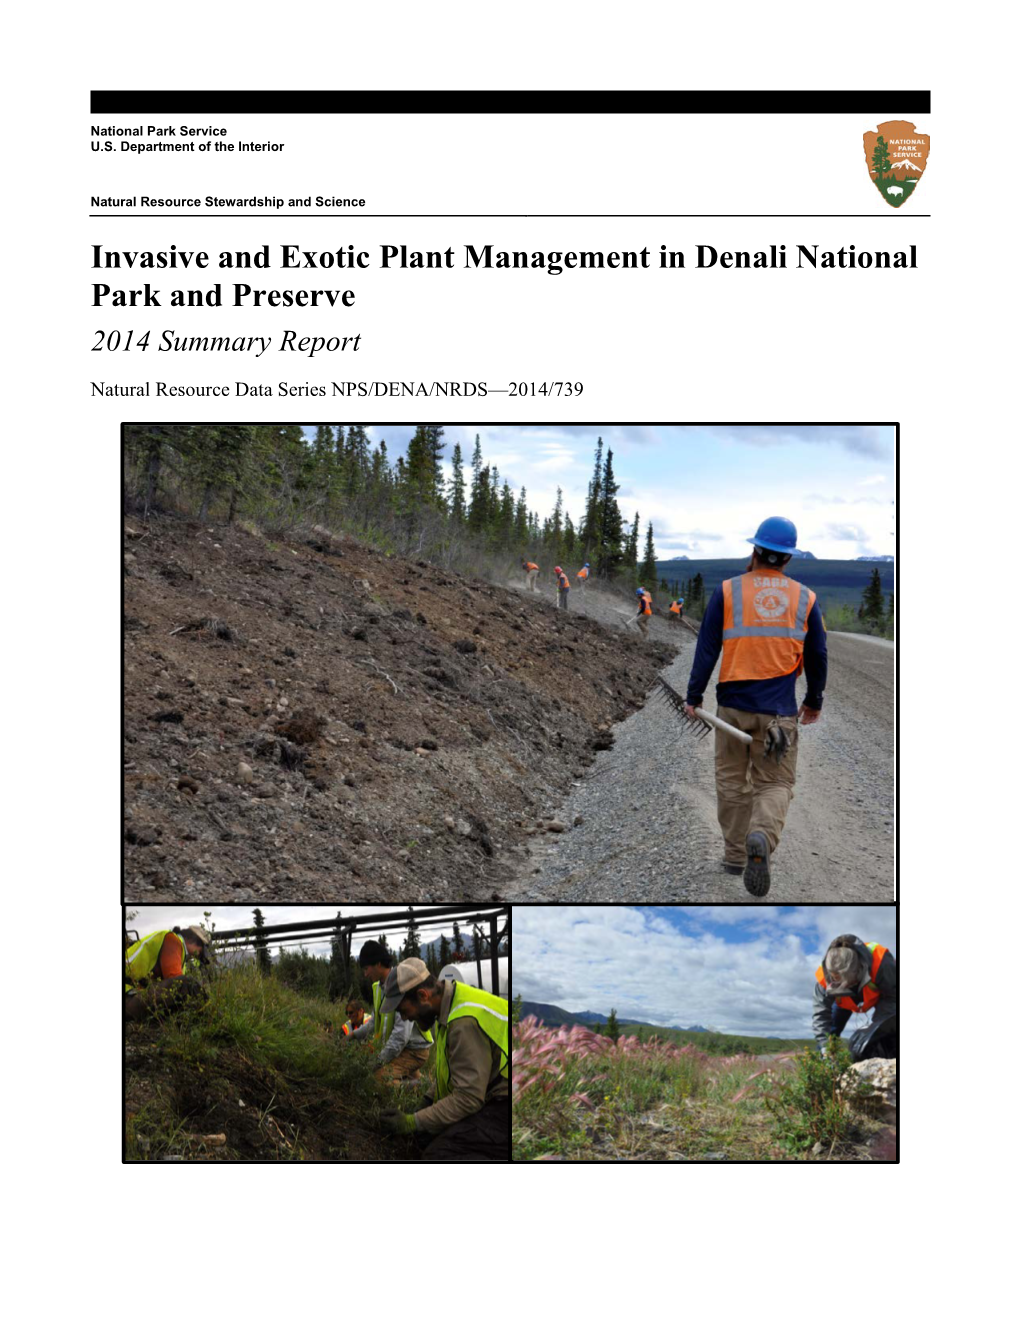 Invasive and Exotic Plant Management in Denali National Park and Preserve 2014 Summary Report